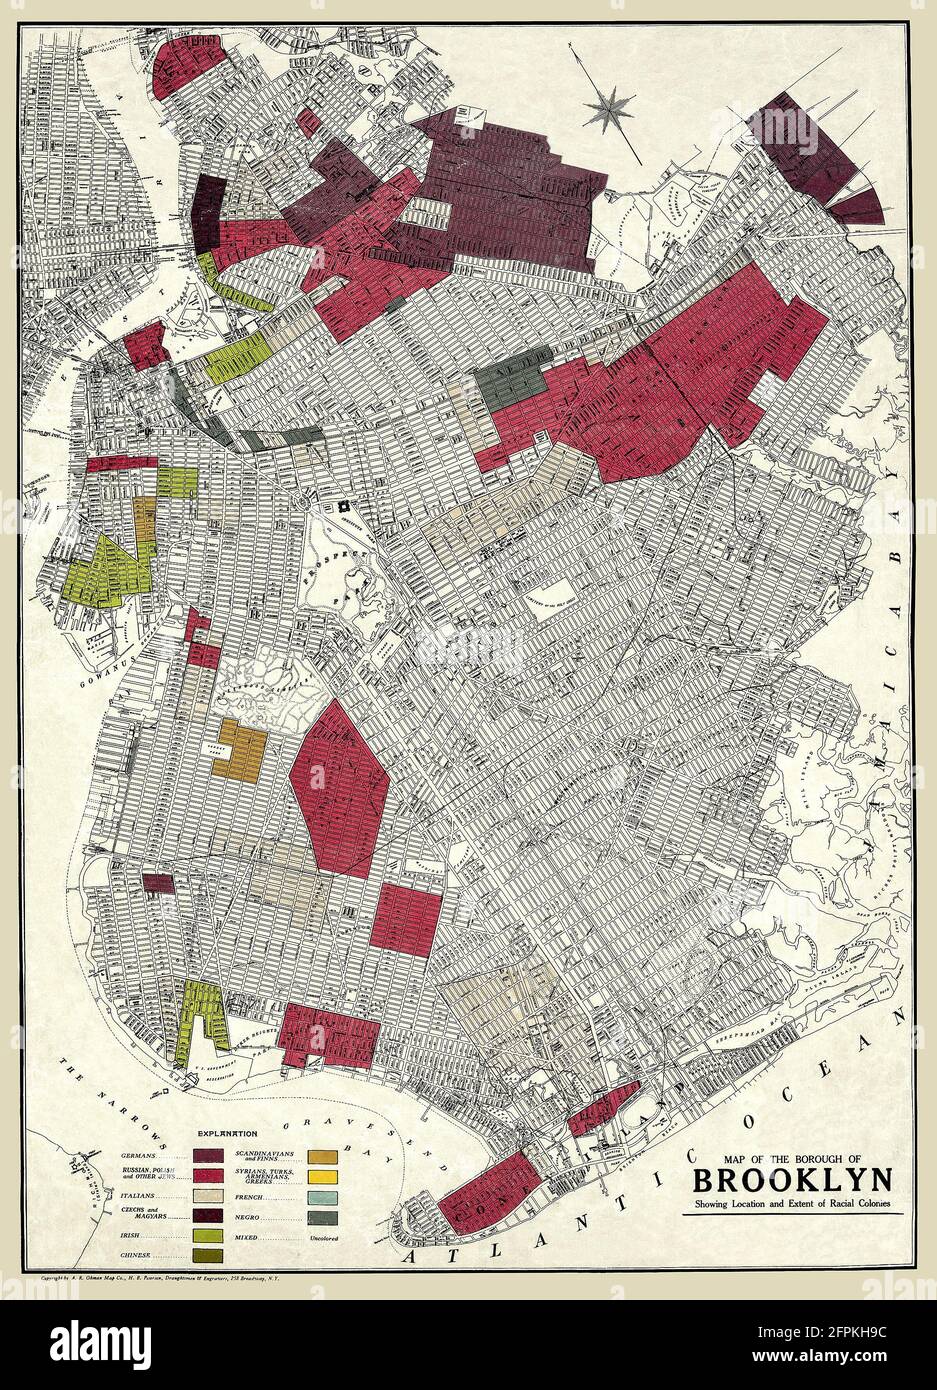 Original title: 'Map of the Borough of Brooklyn showing location of racial colonies.' This is an enhanced, restored reproduction of a special map of Brooklyn, NY, showing locations of racial populations published 1920. Originally the map was a product of fear that certain 'unassimilated' groups might have seditious sympathies ('The Red Scare') at the time of the Bolshevik Revolution in Russia . [Also see a similar map of Manhattan]. This map was a commercial edition based on state government maps produced by the New York State Joint Legislative Committee to Investigate Seditious Activities. Stock Photo